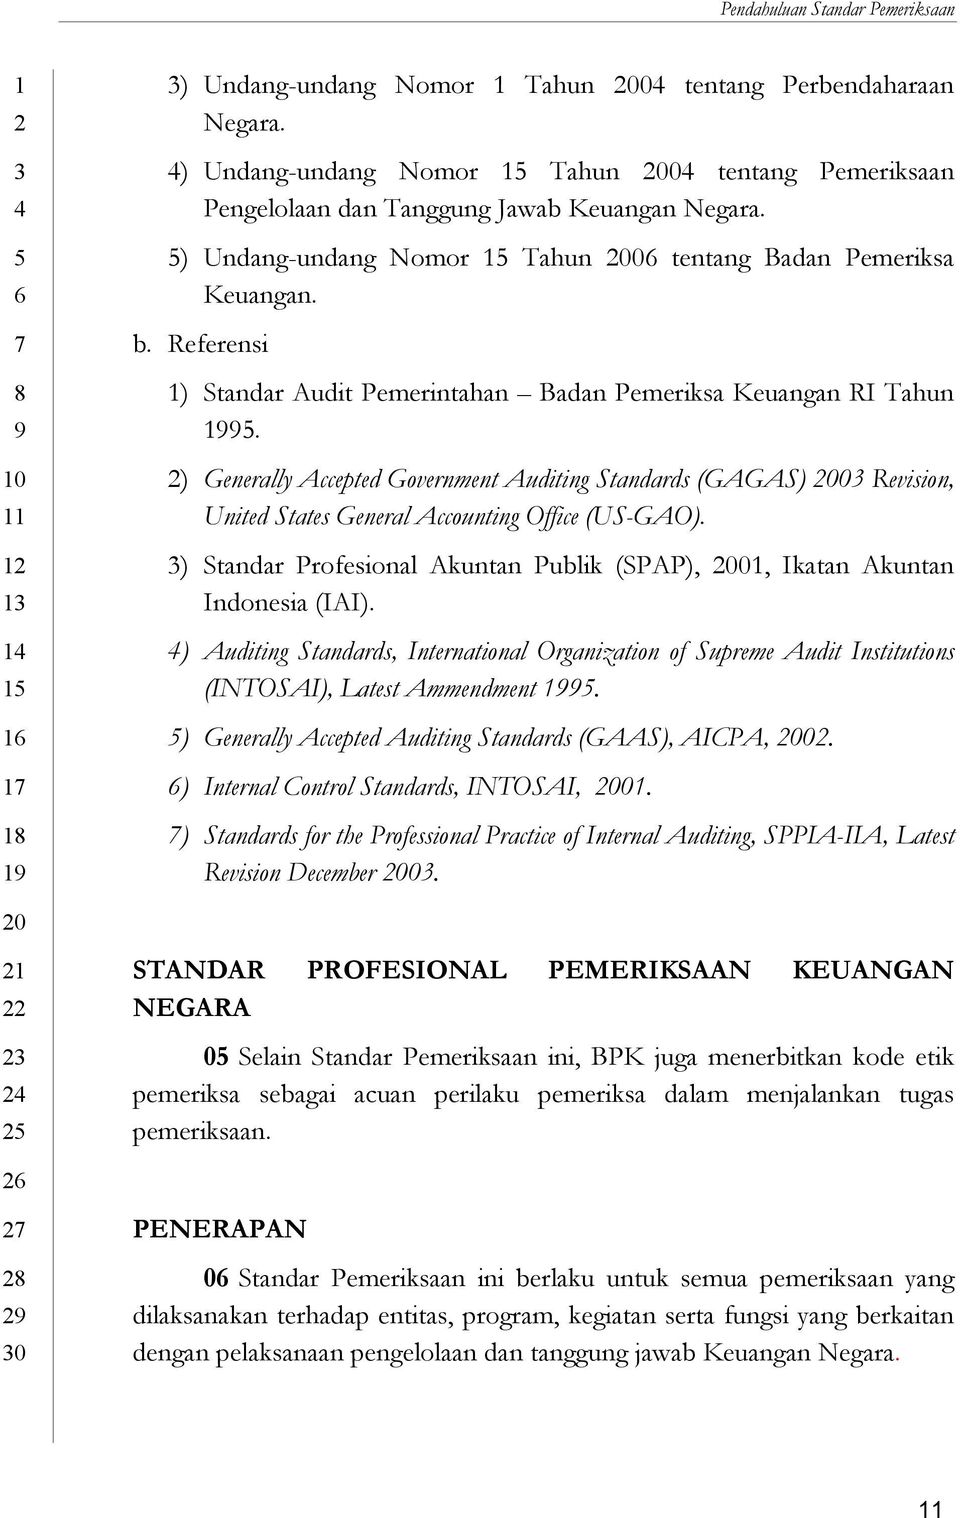 ) Generally Accepted Government Auditing Standards (GAGAS) 0 Revision, United States General Accounting Office (US-GAO). ) Standar Profesional Akuntan Publik (SPAP), 0, Ikatan Akuntan Indonesia (IAI).